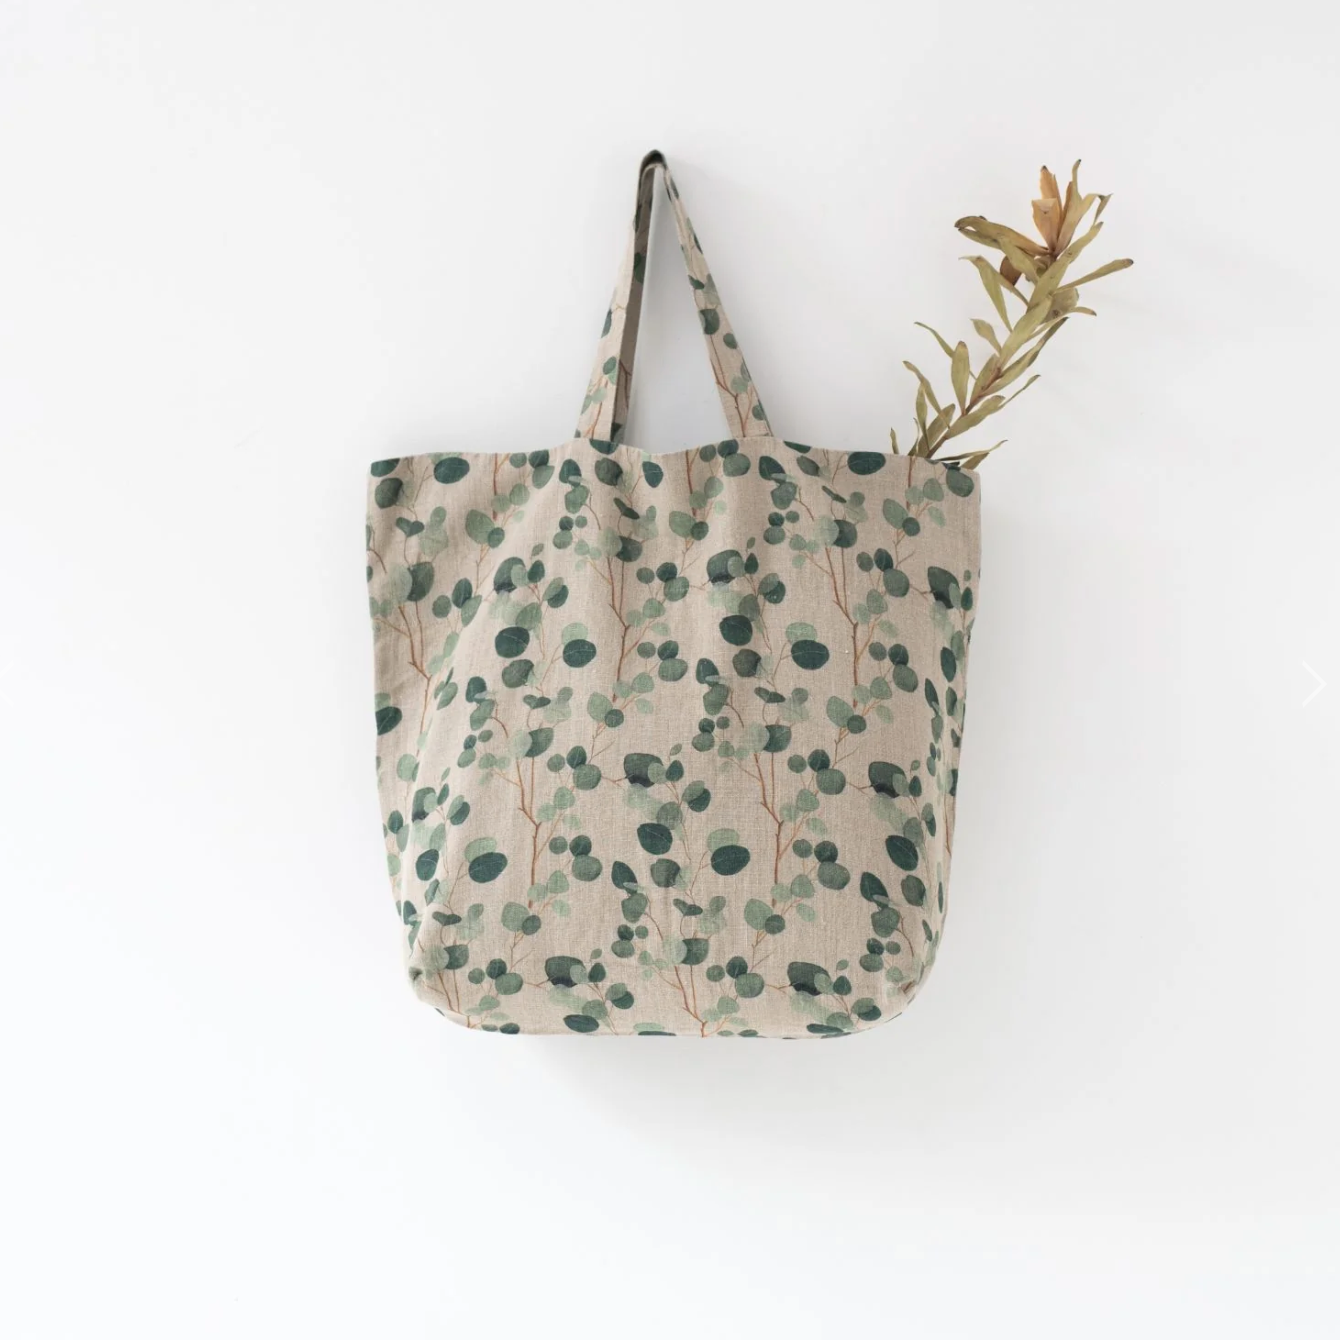 A Linen Tales Floral Linen Bag with eucalyptus designs and a lily flower stem sticking out from the top.